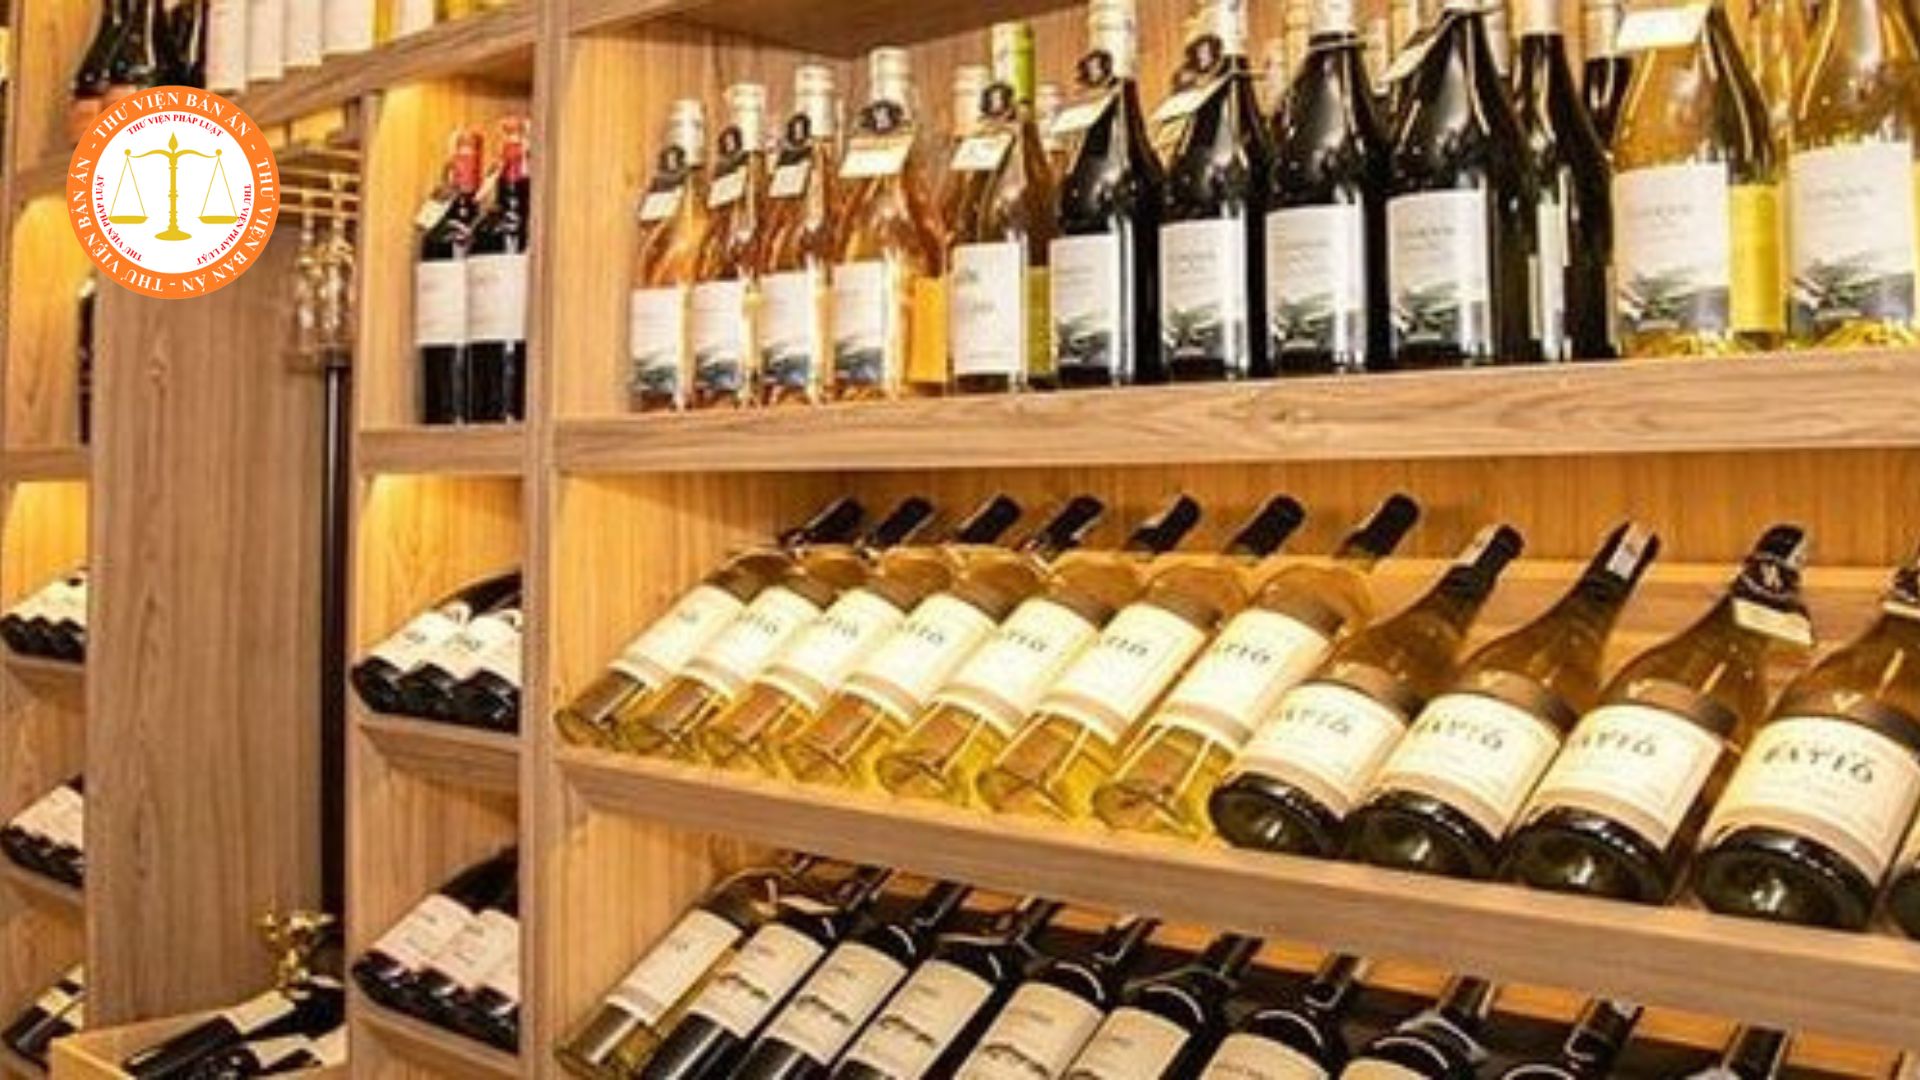 Applications and procedures for licenses for alcohol wholesaling in Vietnam